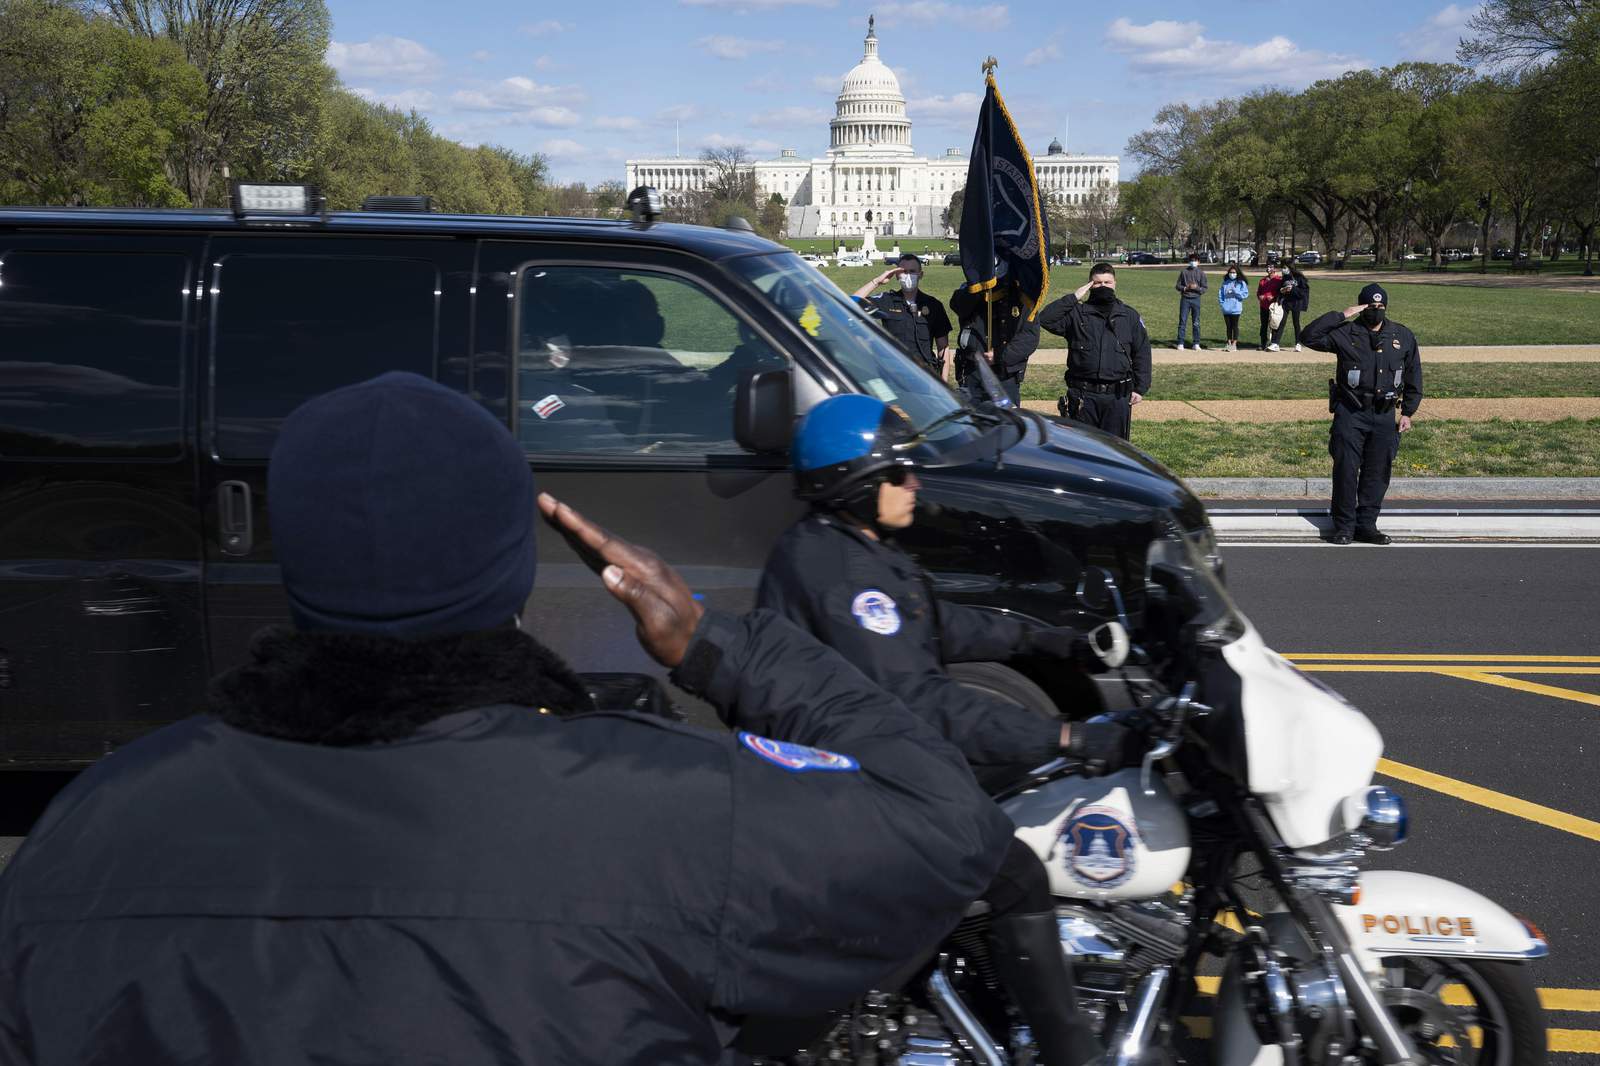 PHOTOS: 2 Capitol Police officers struck by vehicle; complex on lockdown